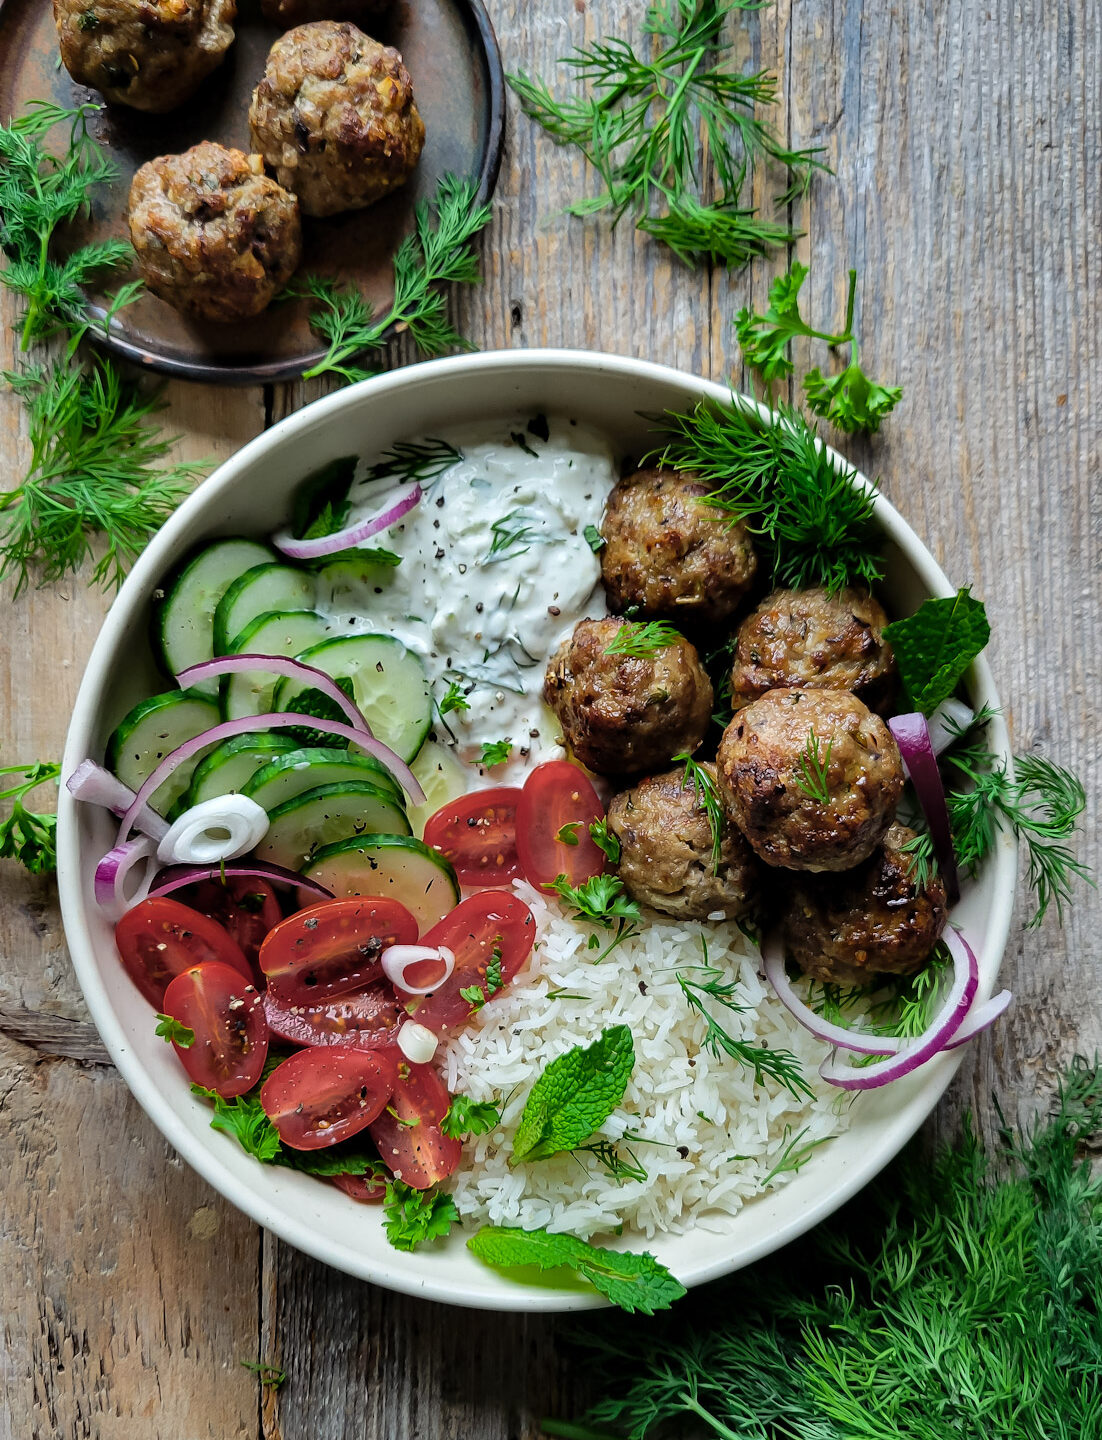 A bowl filled with Feta Stuffed Meatballs, Labneh Tzatziki, rice and fresh vegetables. A plate of more meatballs in in the background. Fresh herbs are scattered about.